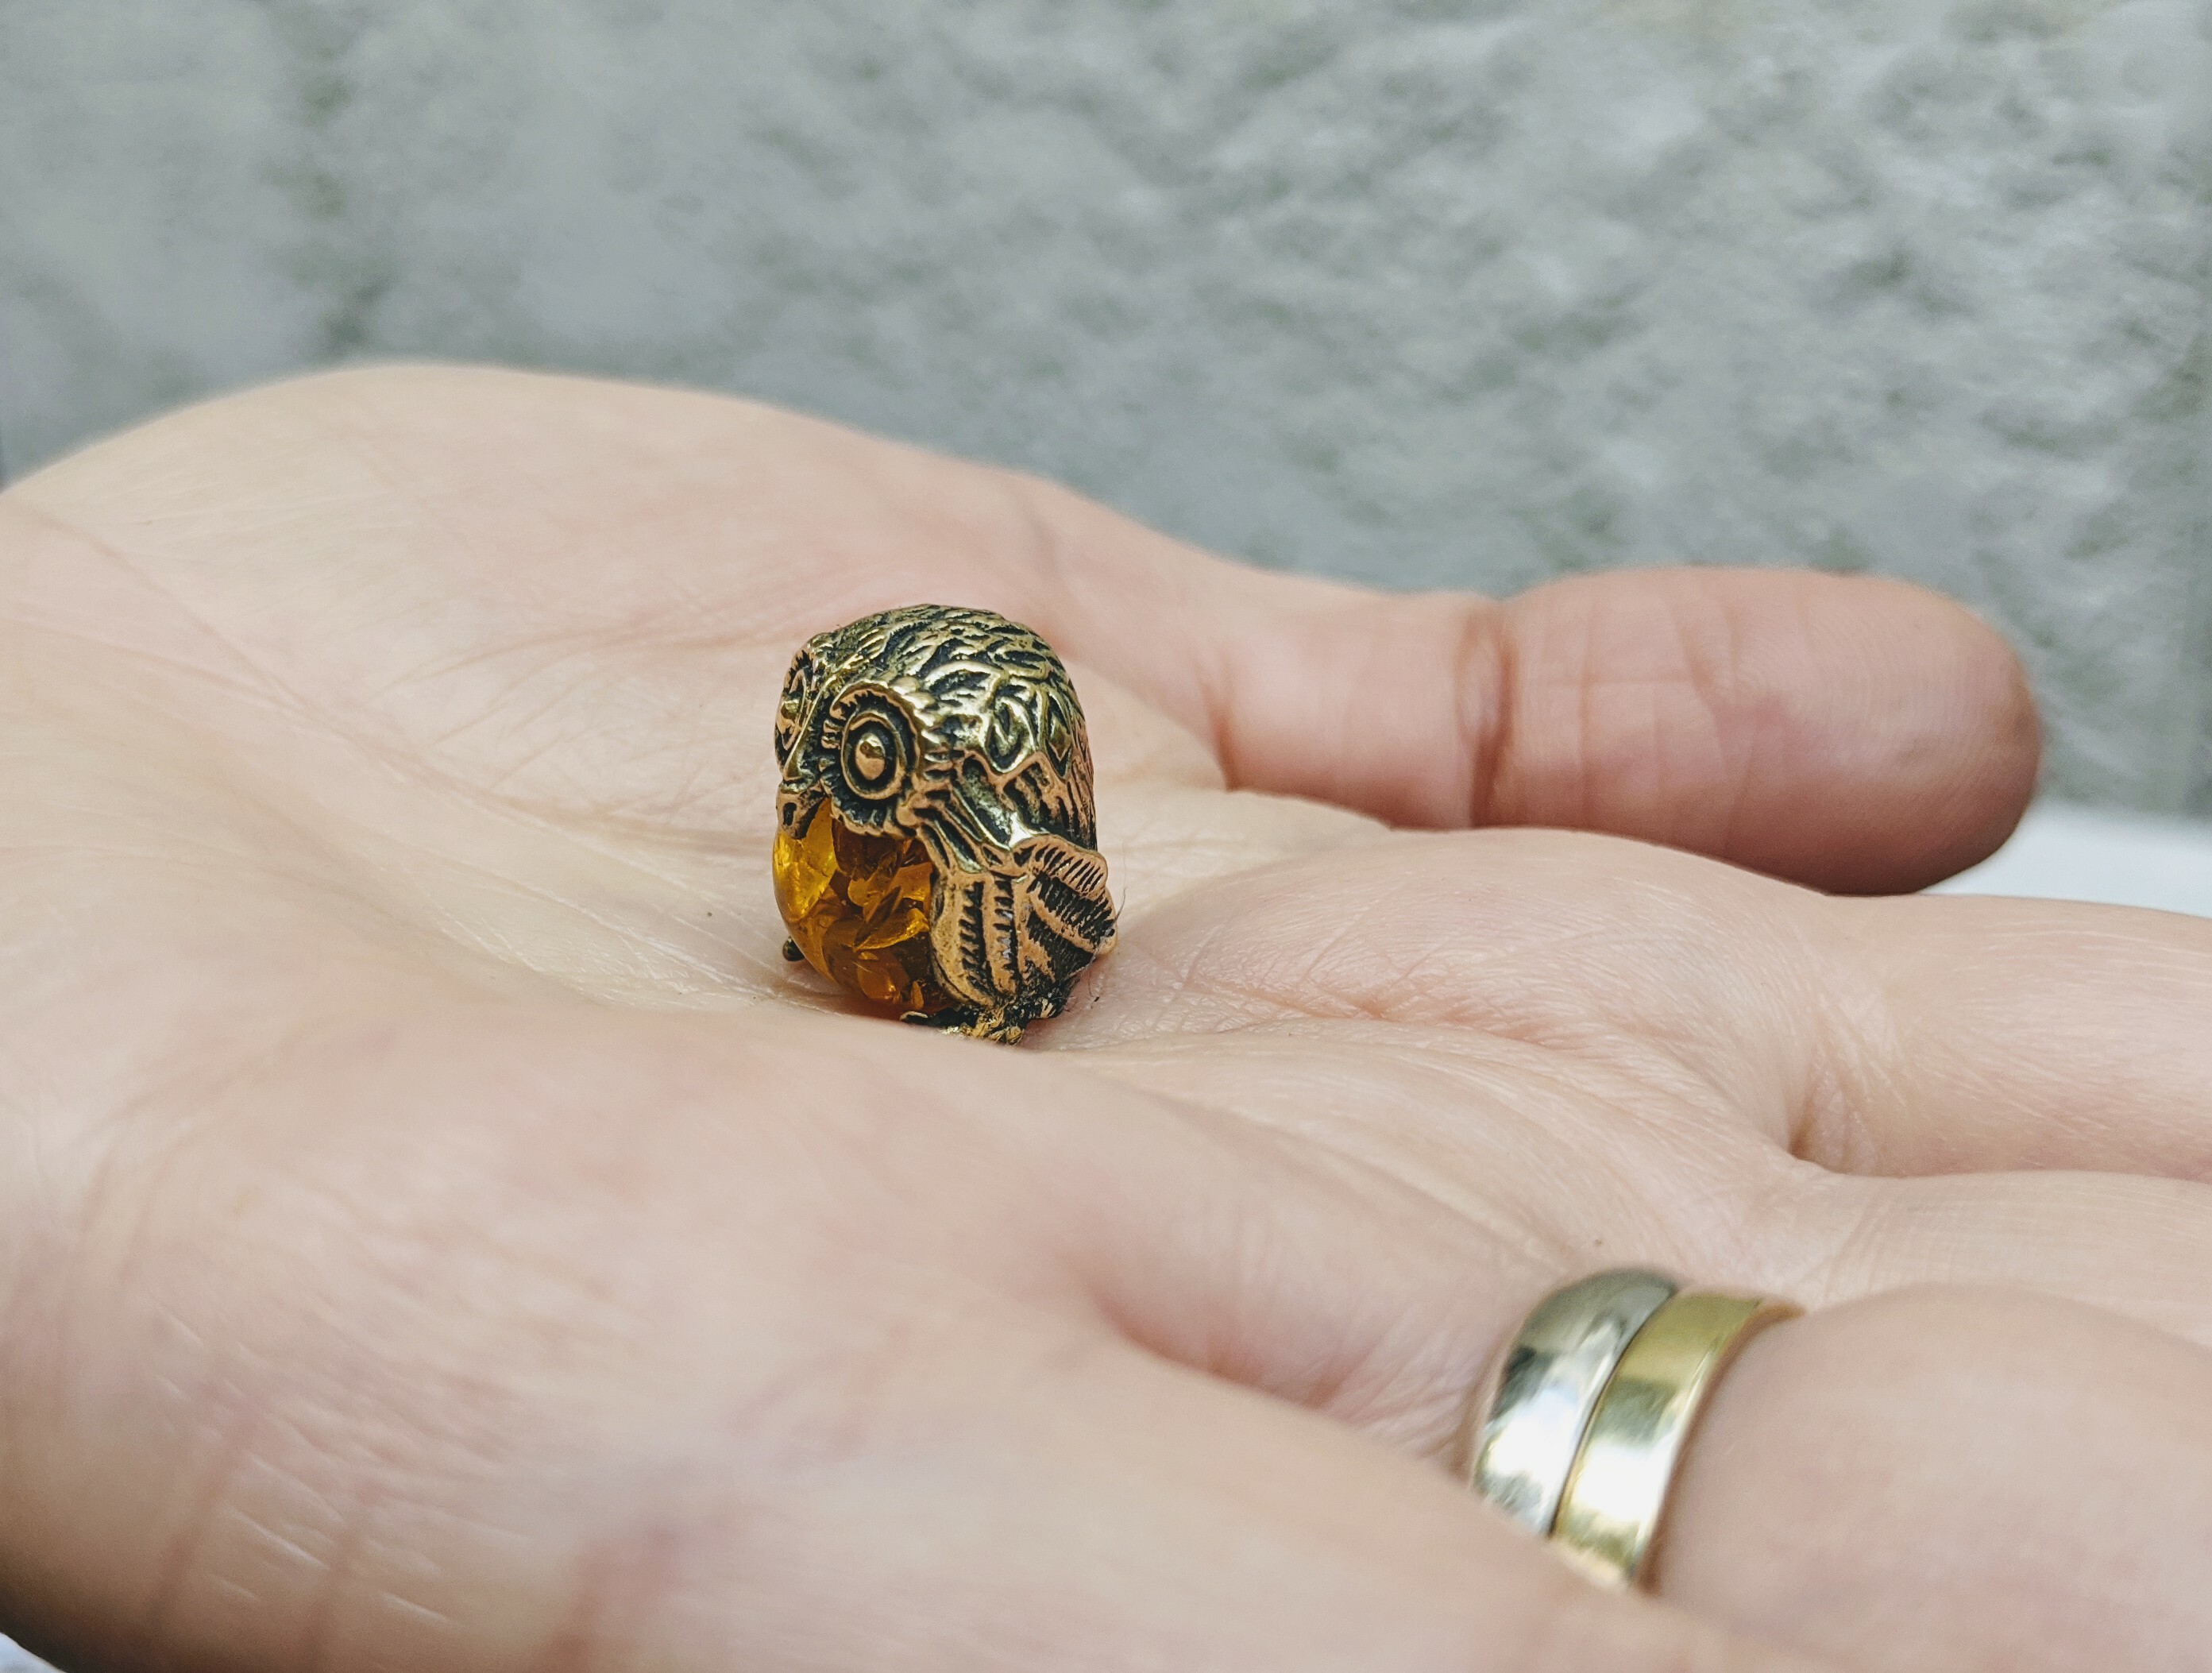 Details about   Brass Owl With Sun Ball Collectible Figurine Souvenir 